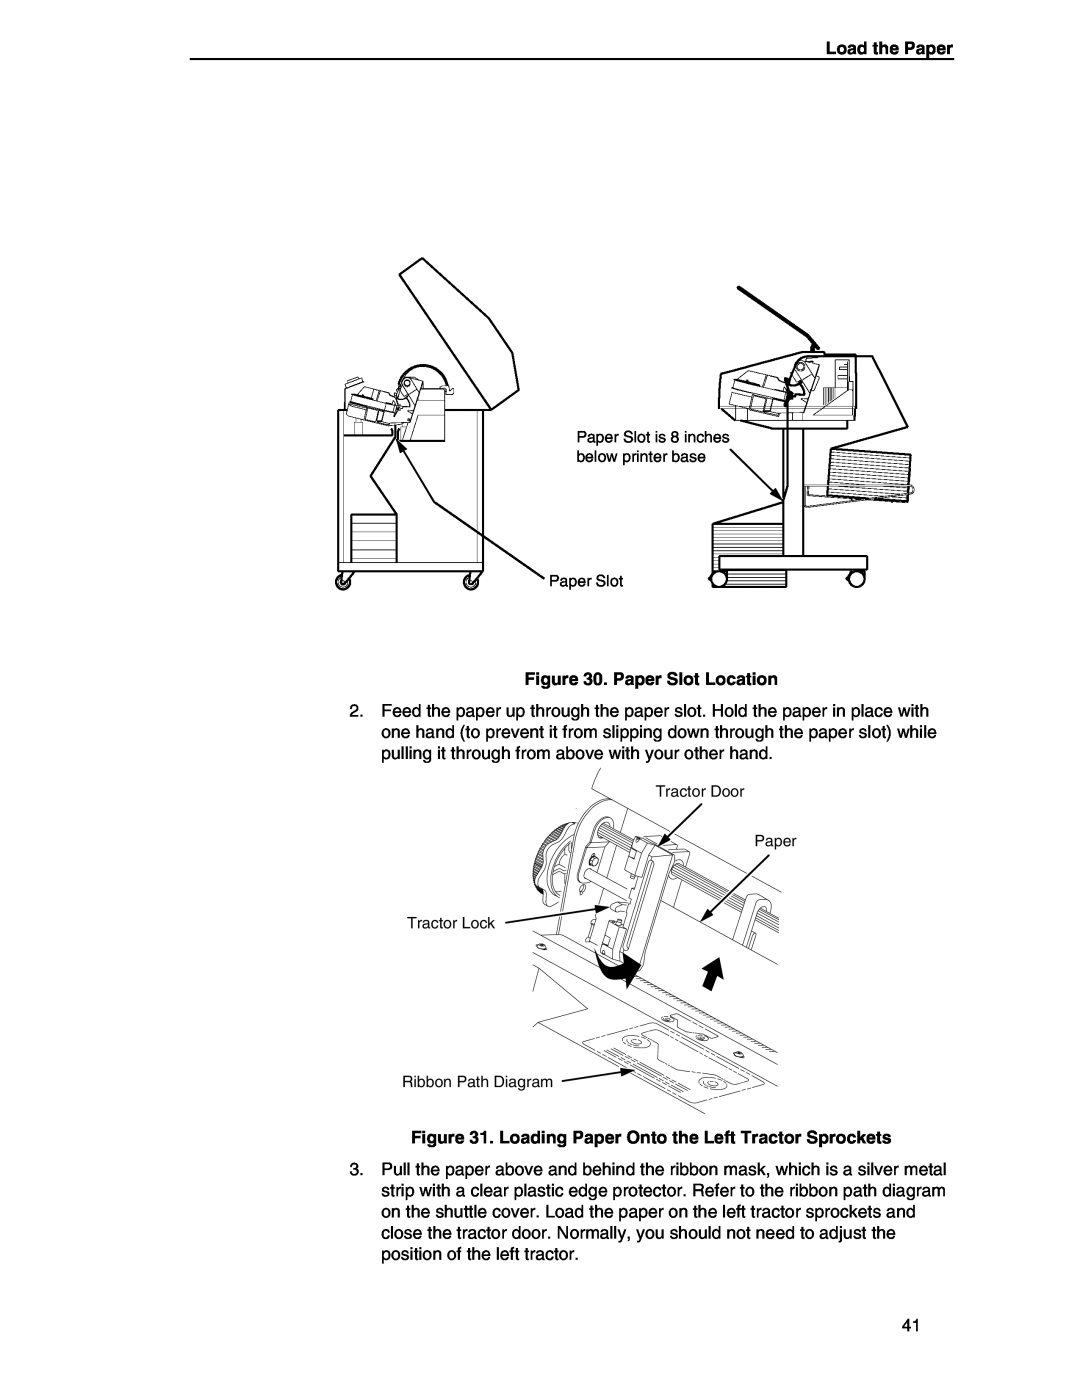 Compaq P5000 Series setup guide Load the Paper, Paper Slot Location, Loading Paper Onto the Left Tractor Sprockets 